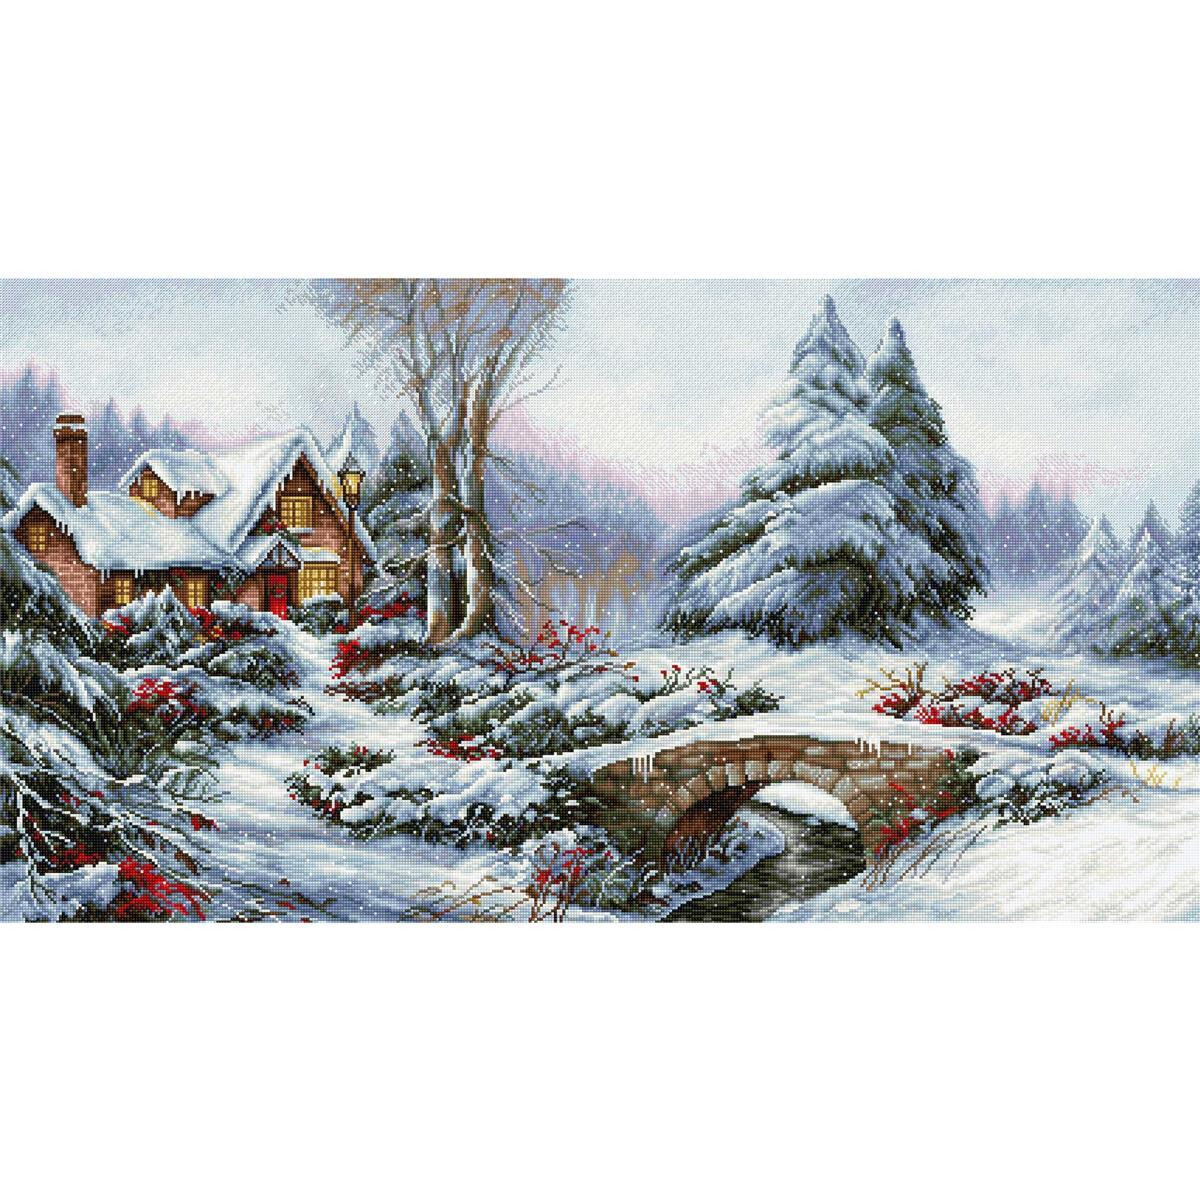 Luca-S counted cross stitch kit "Winter landscape...